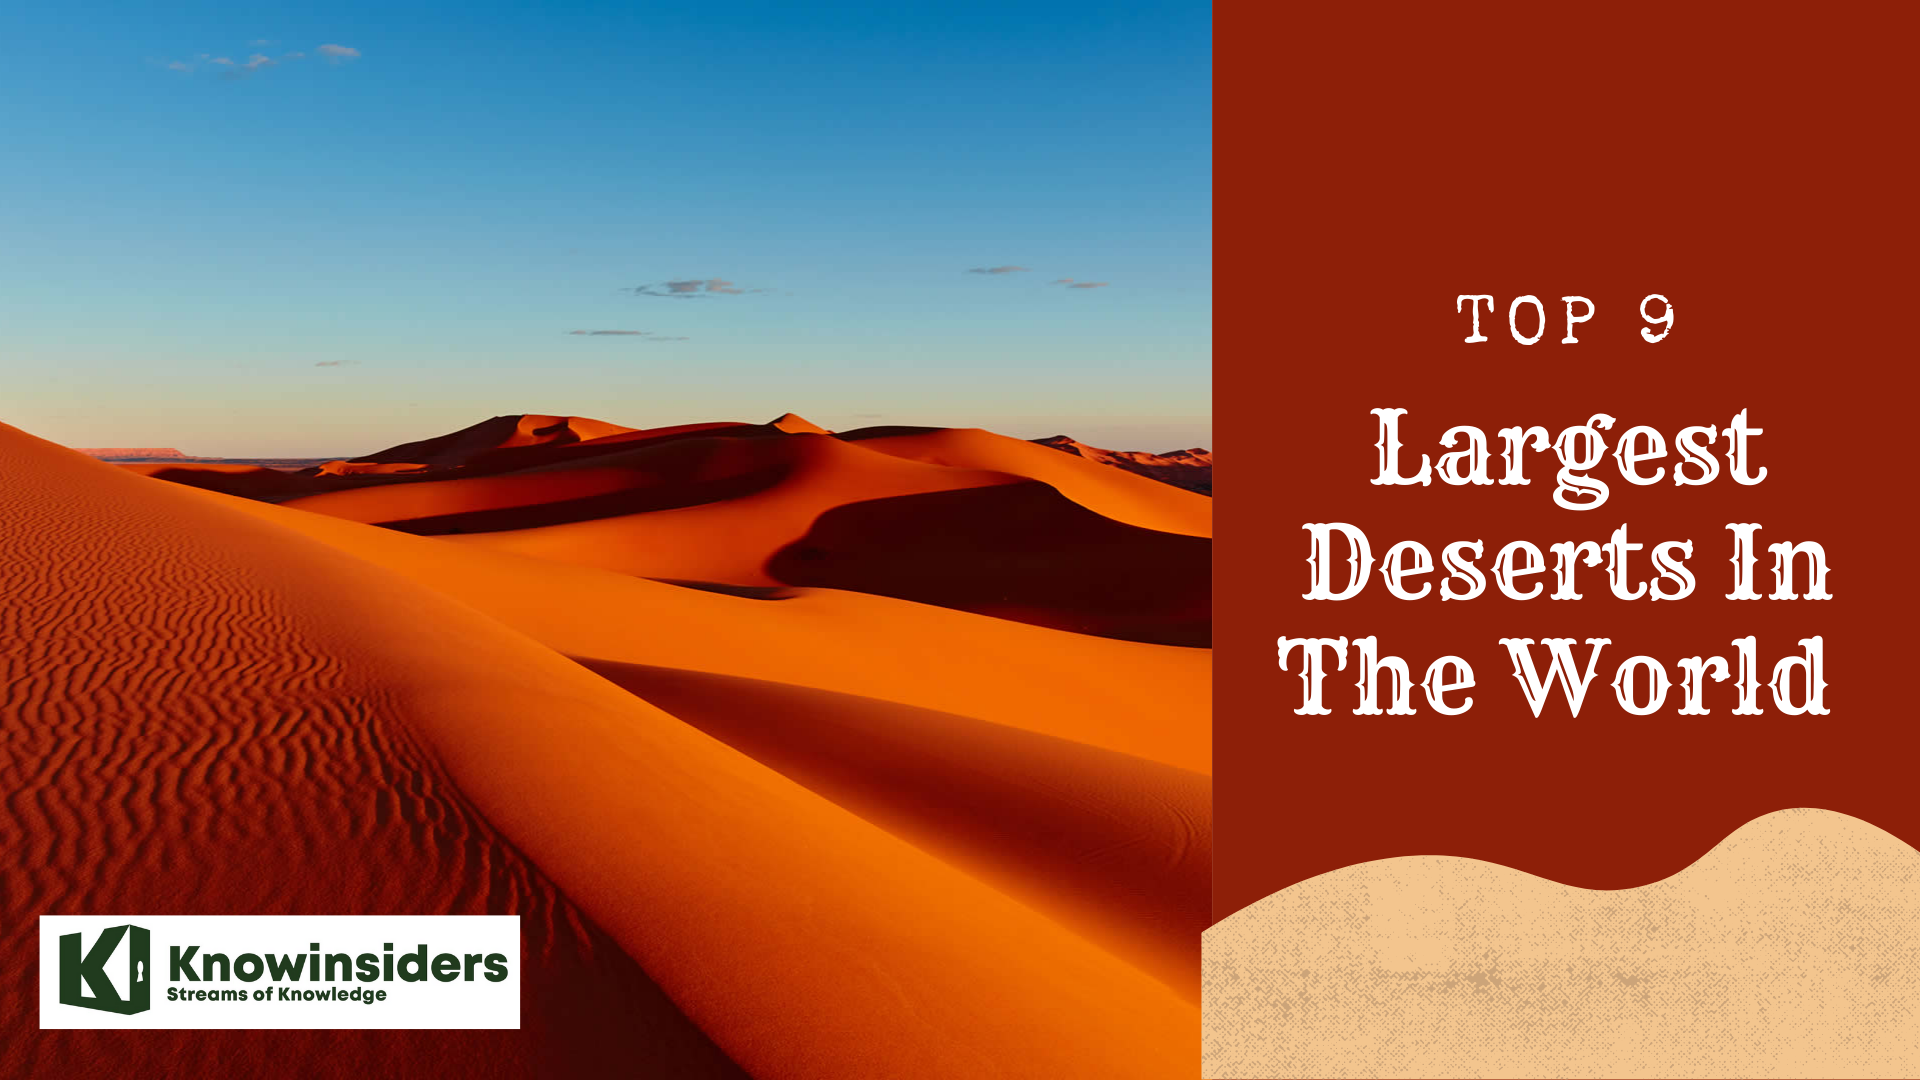 Top 9 Largest Deserts In The World